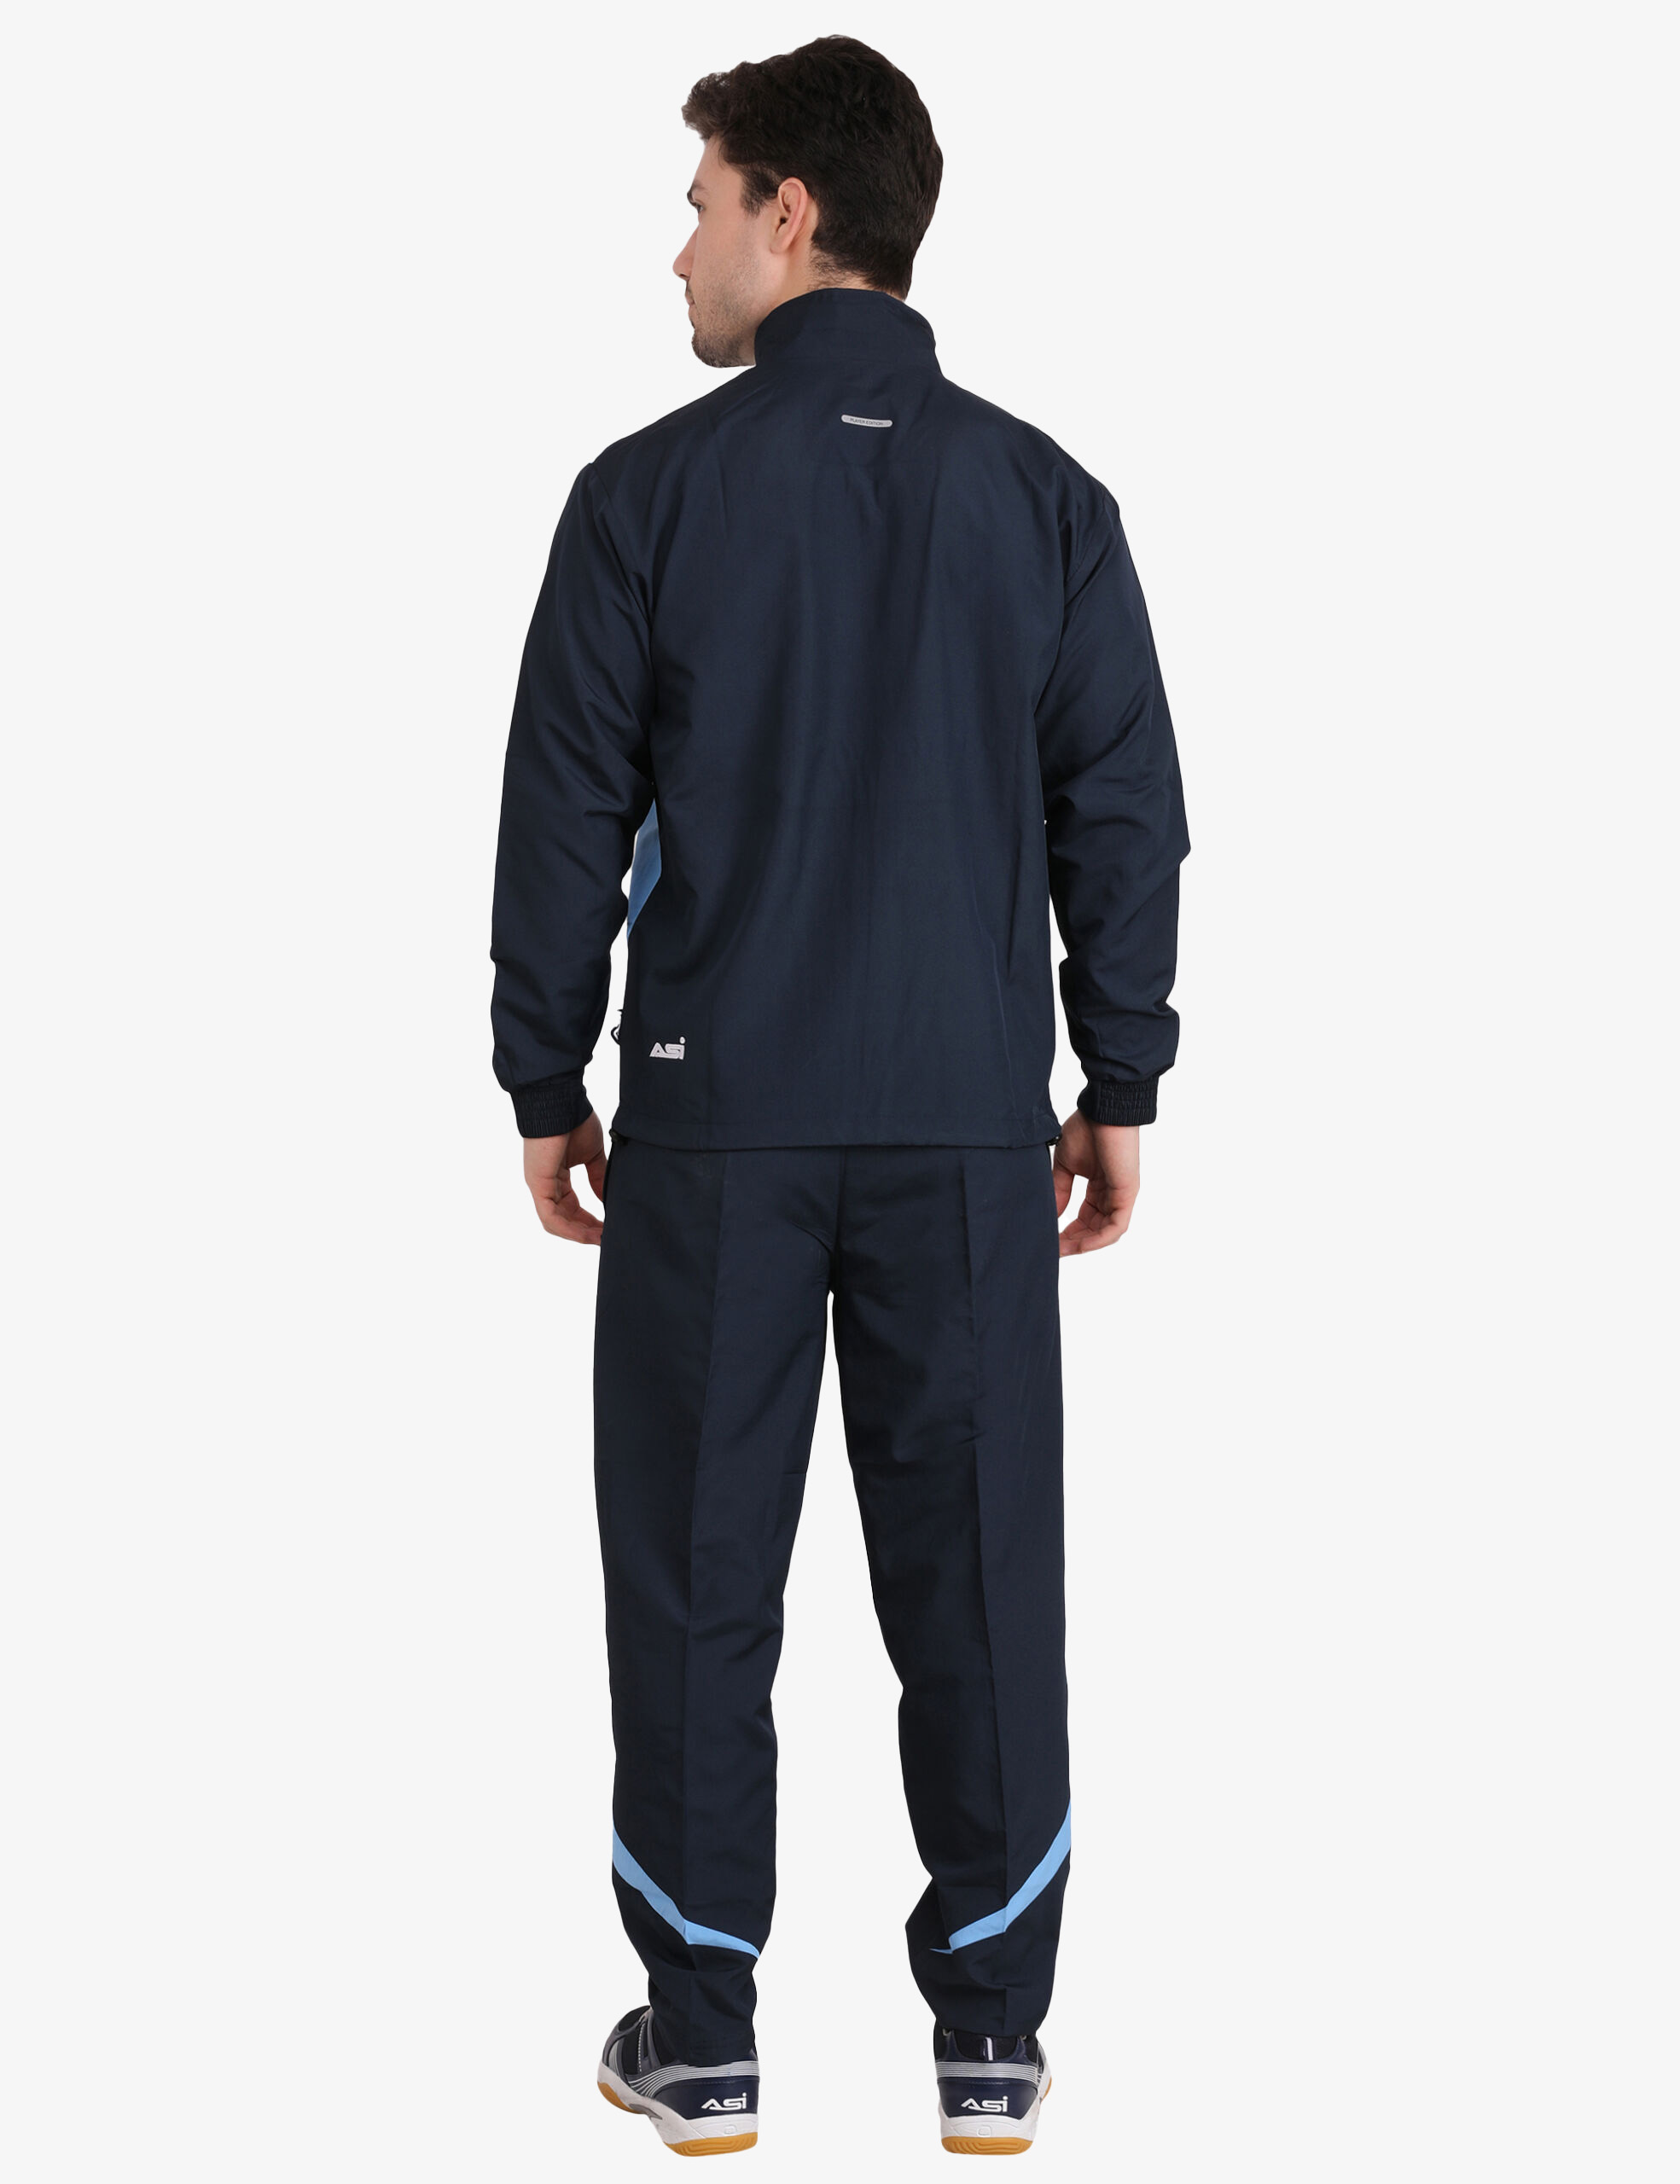 ASI Flair Track Suit for Men Navy Blue & Sky Blue